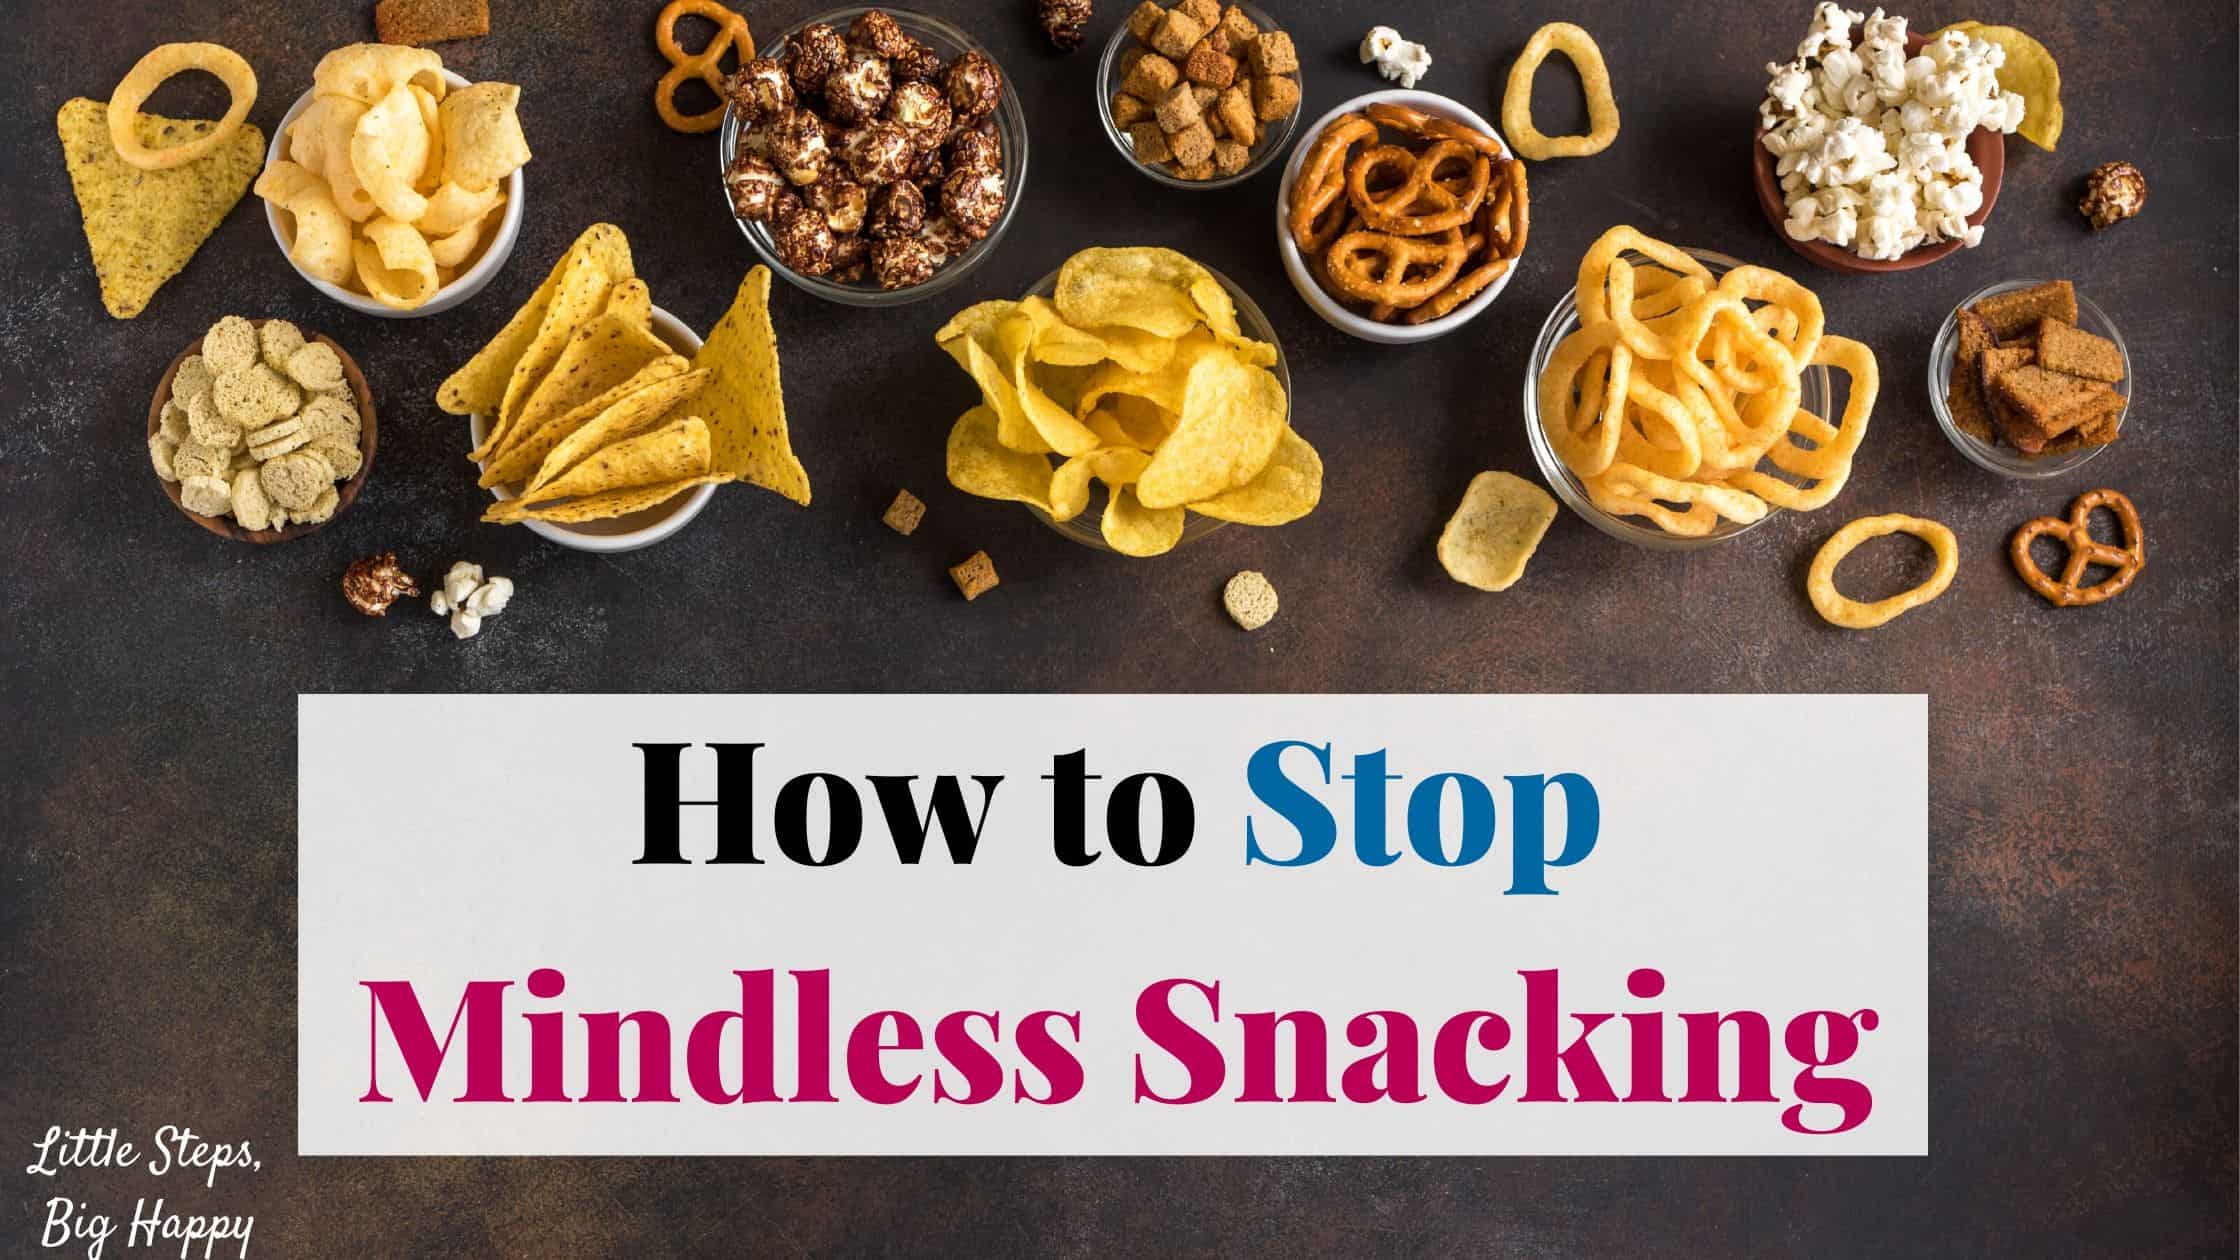 Bowls of junk food snacks. Text: How to Stop Mindless Snacking